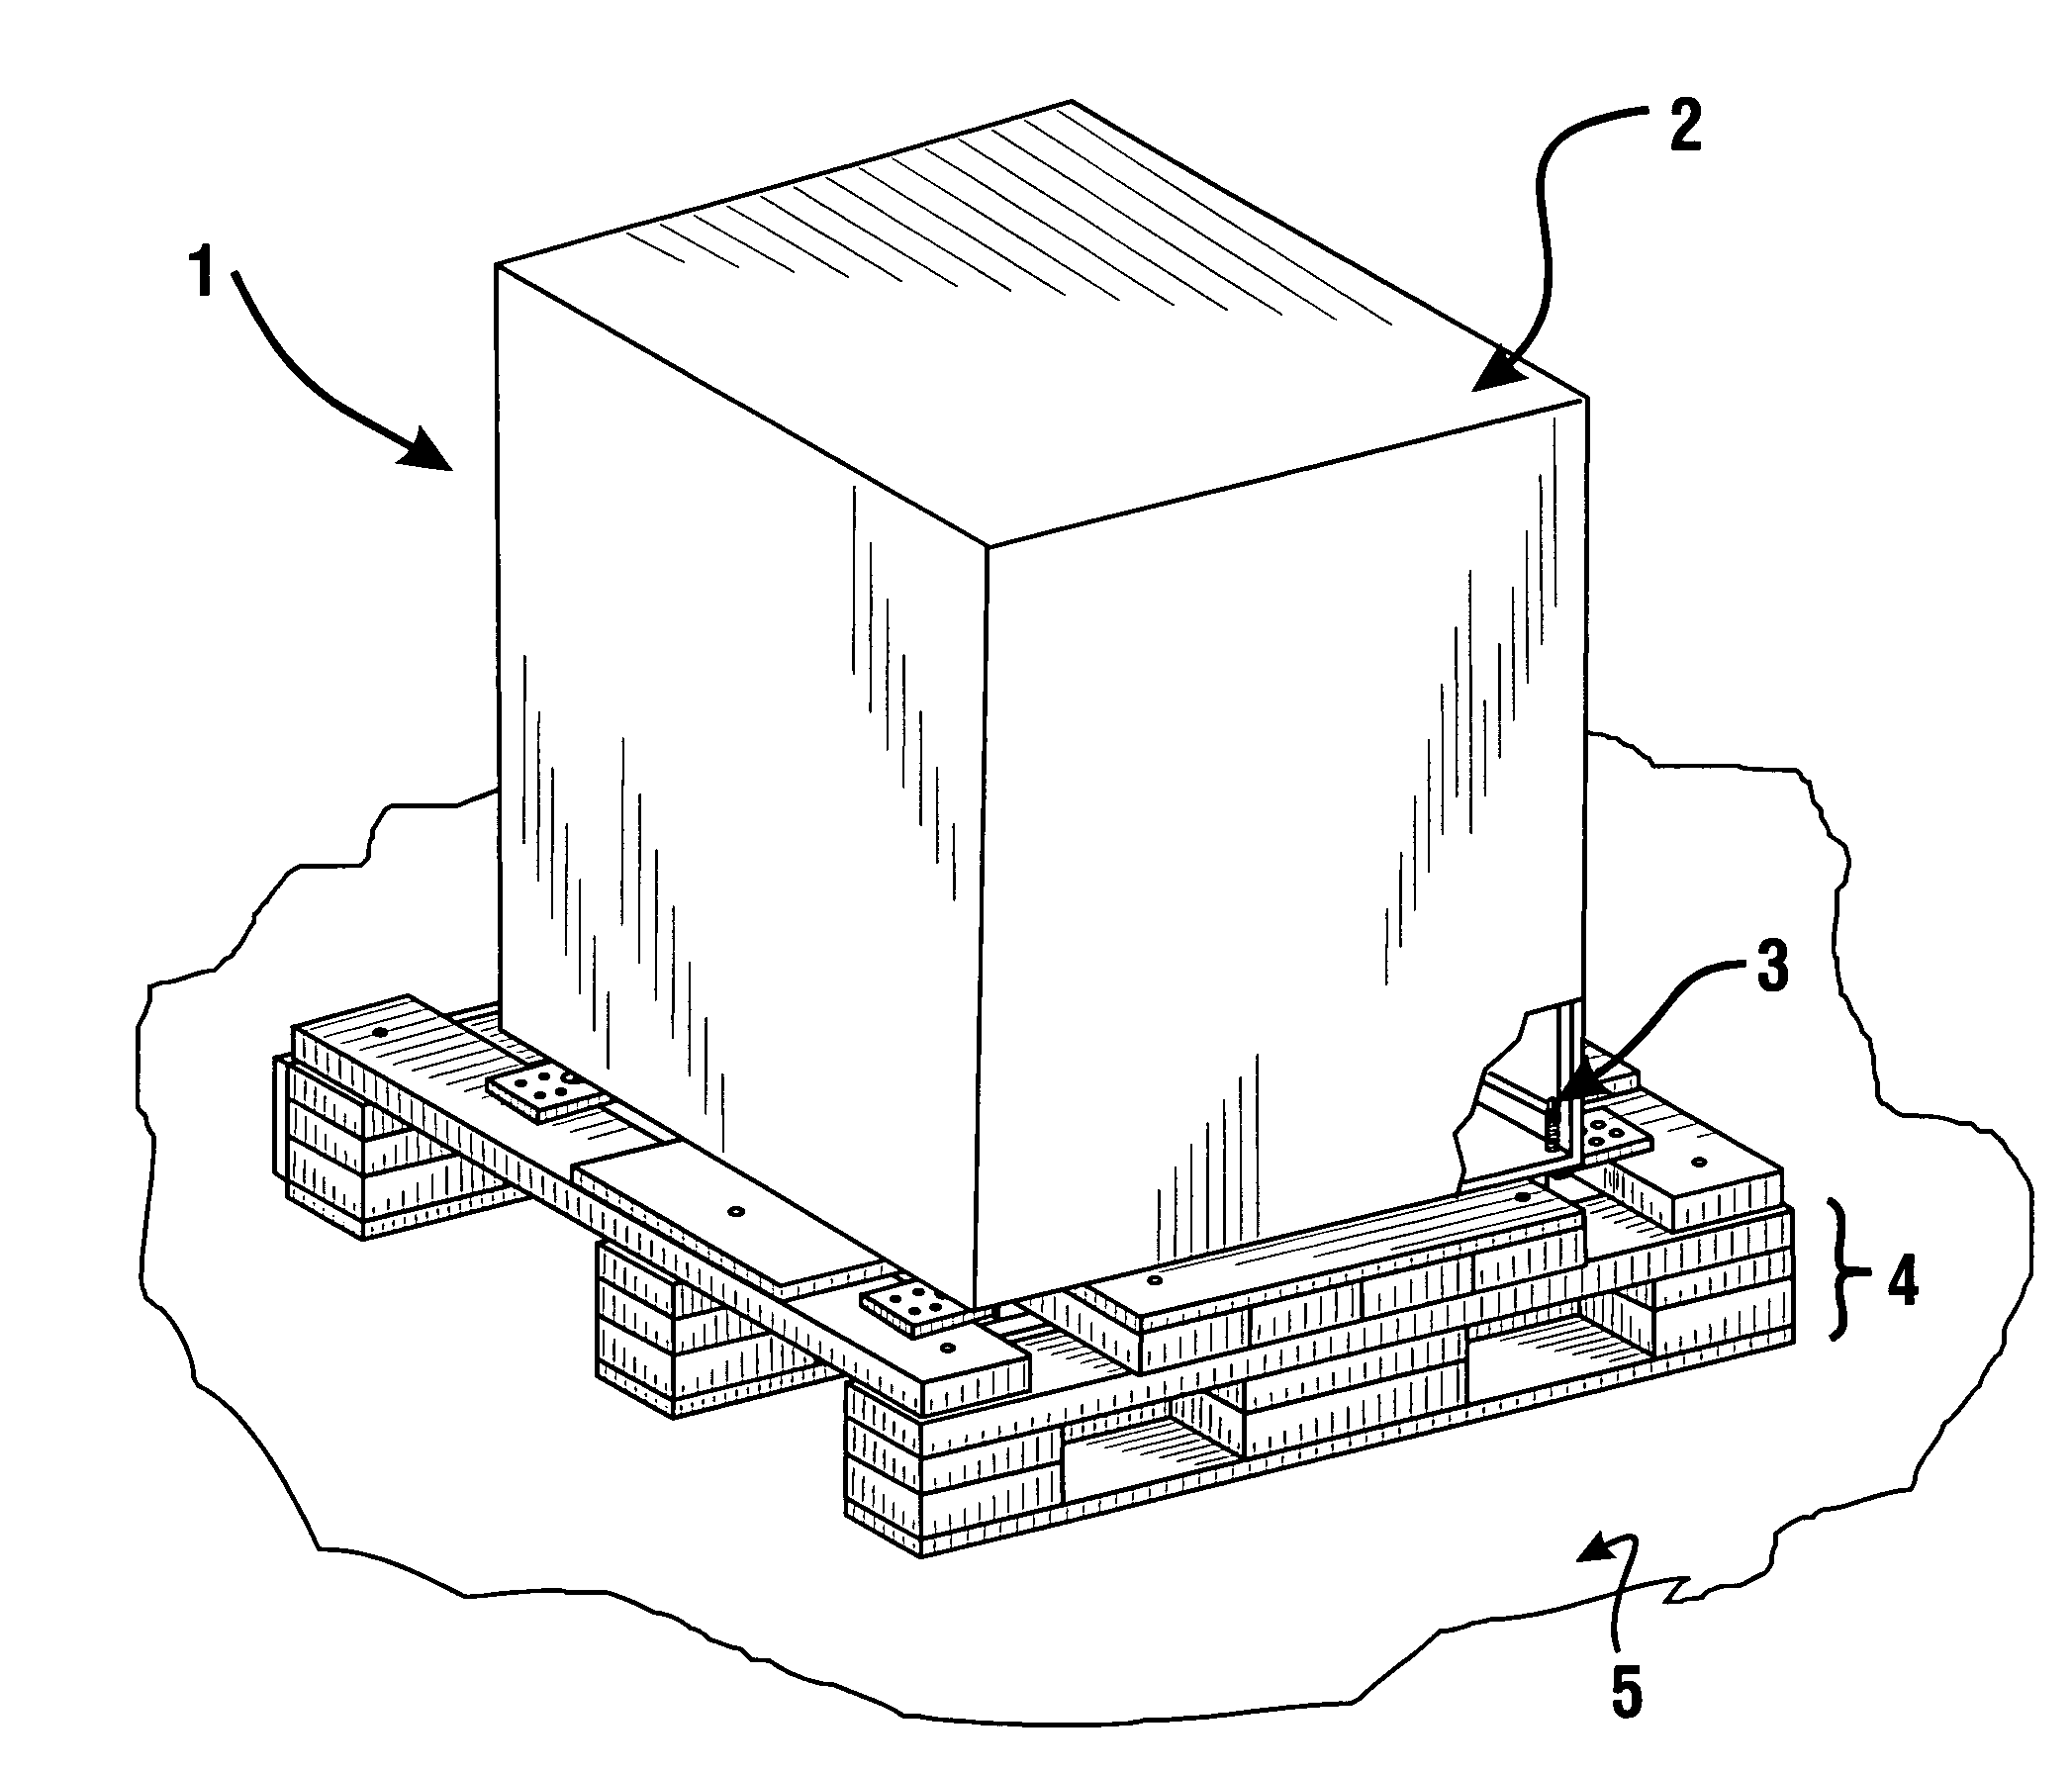 Apparatus for shipping and installation of ATM